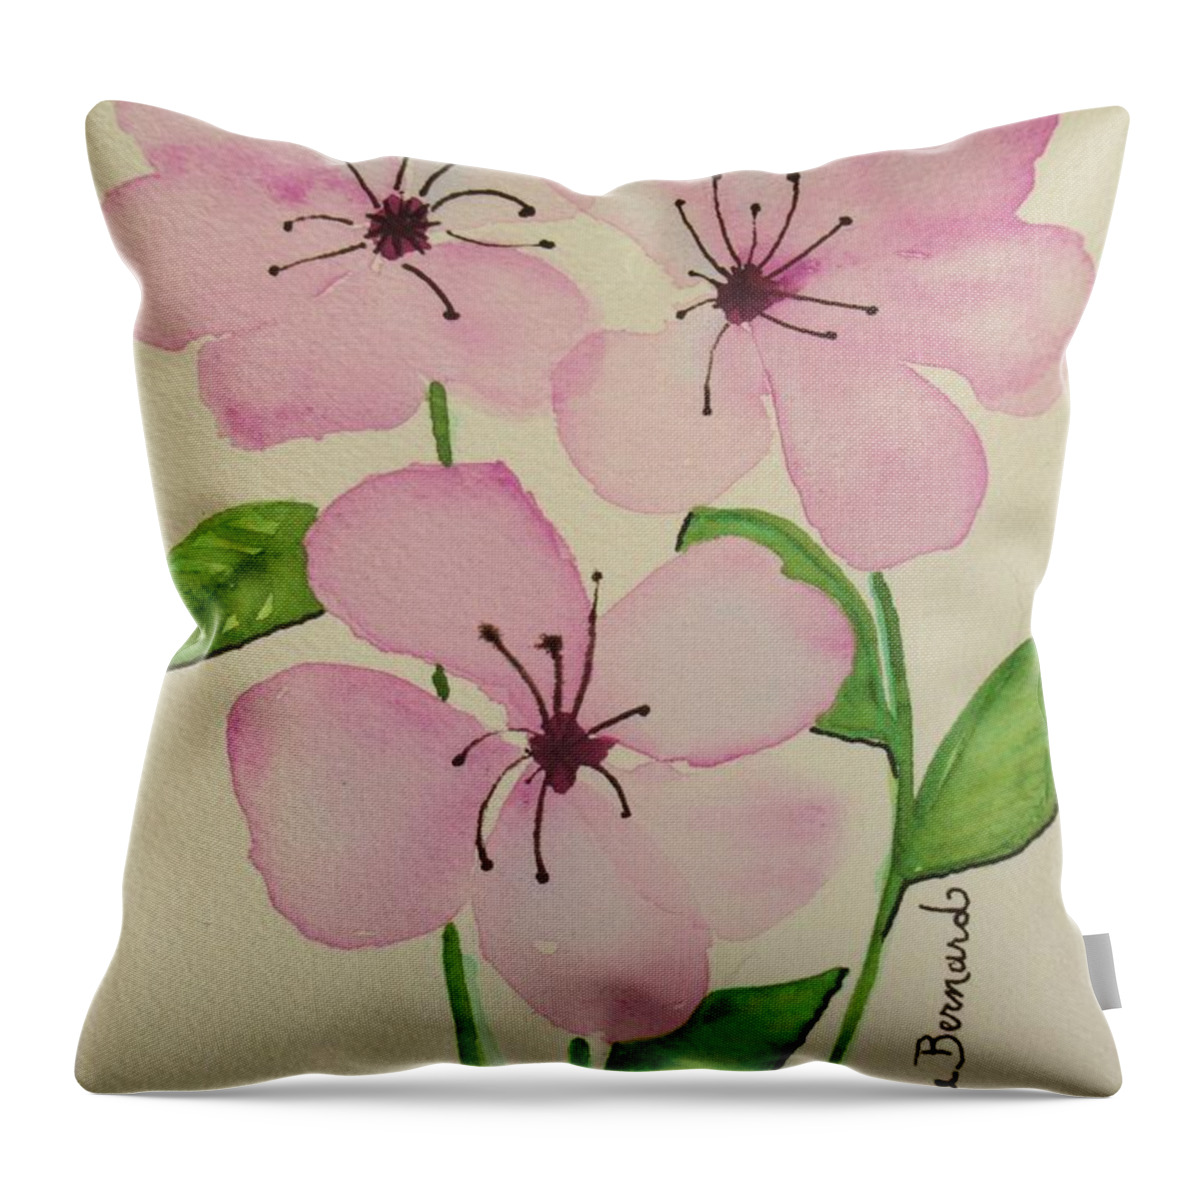 Hushed Hues Throw Pillow featuring the painting Whisper of Pink by Dale Bernard